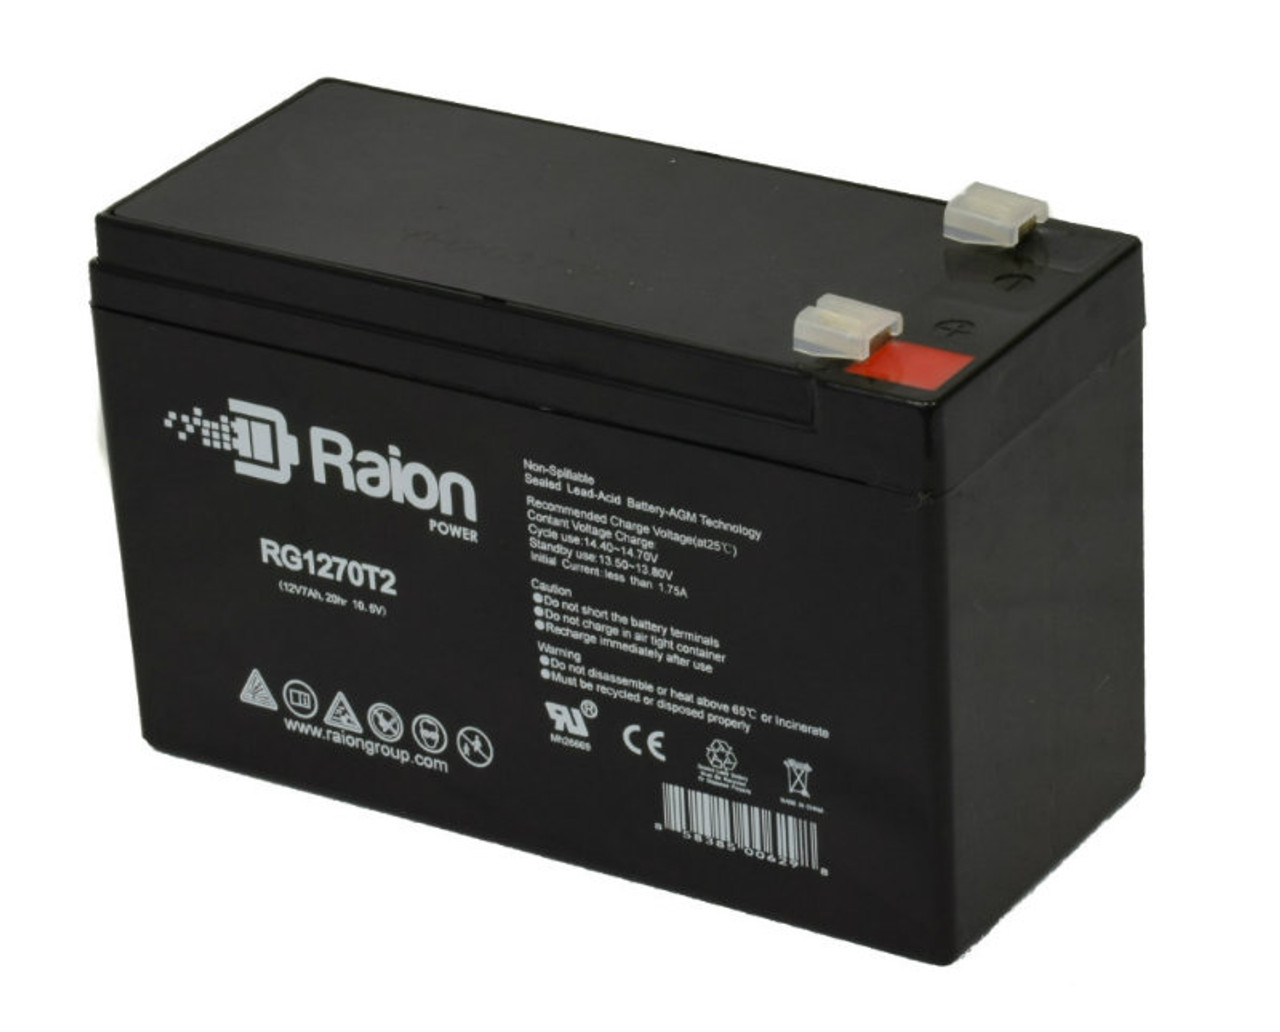 Raion Power Replacement 12V 7Ah RG1270T1 Fire Alarm Battery for Altronix SMP10PMC12X